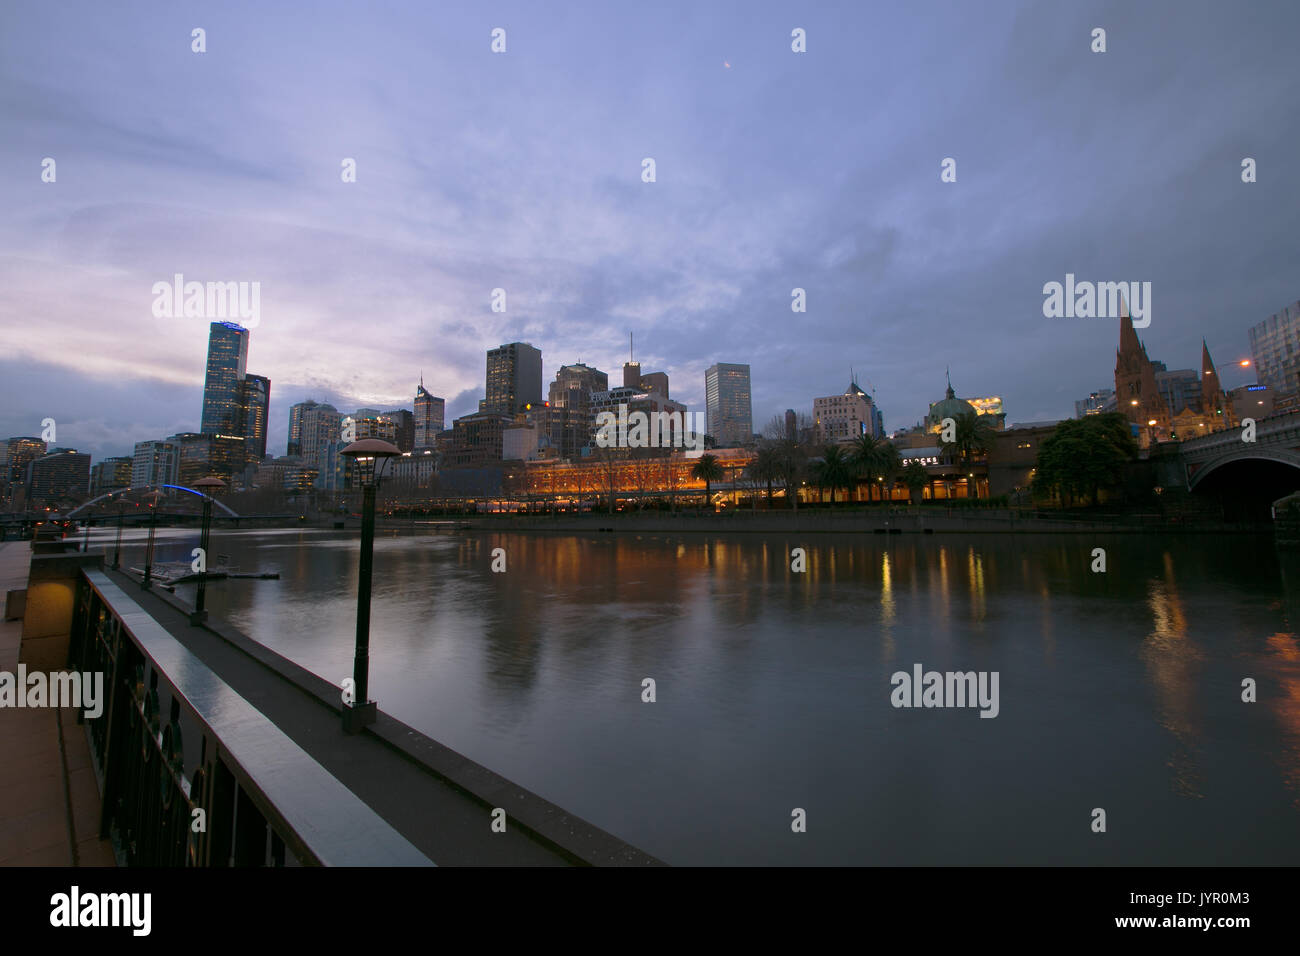 A long exposure photo of the Yarra River, Flinders Street Station, a cluster of buildings, and  the Southbank Footbridge. Stock Photo